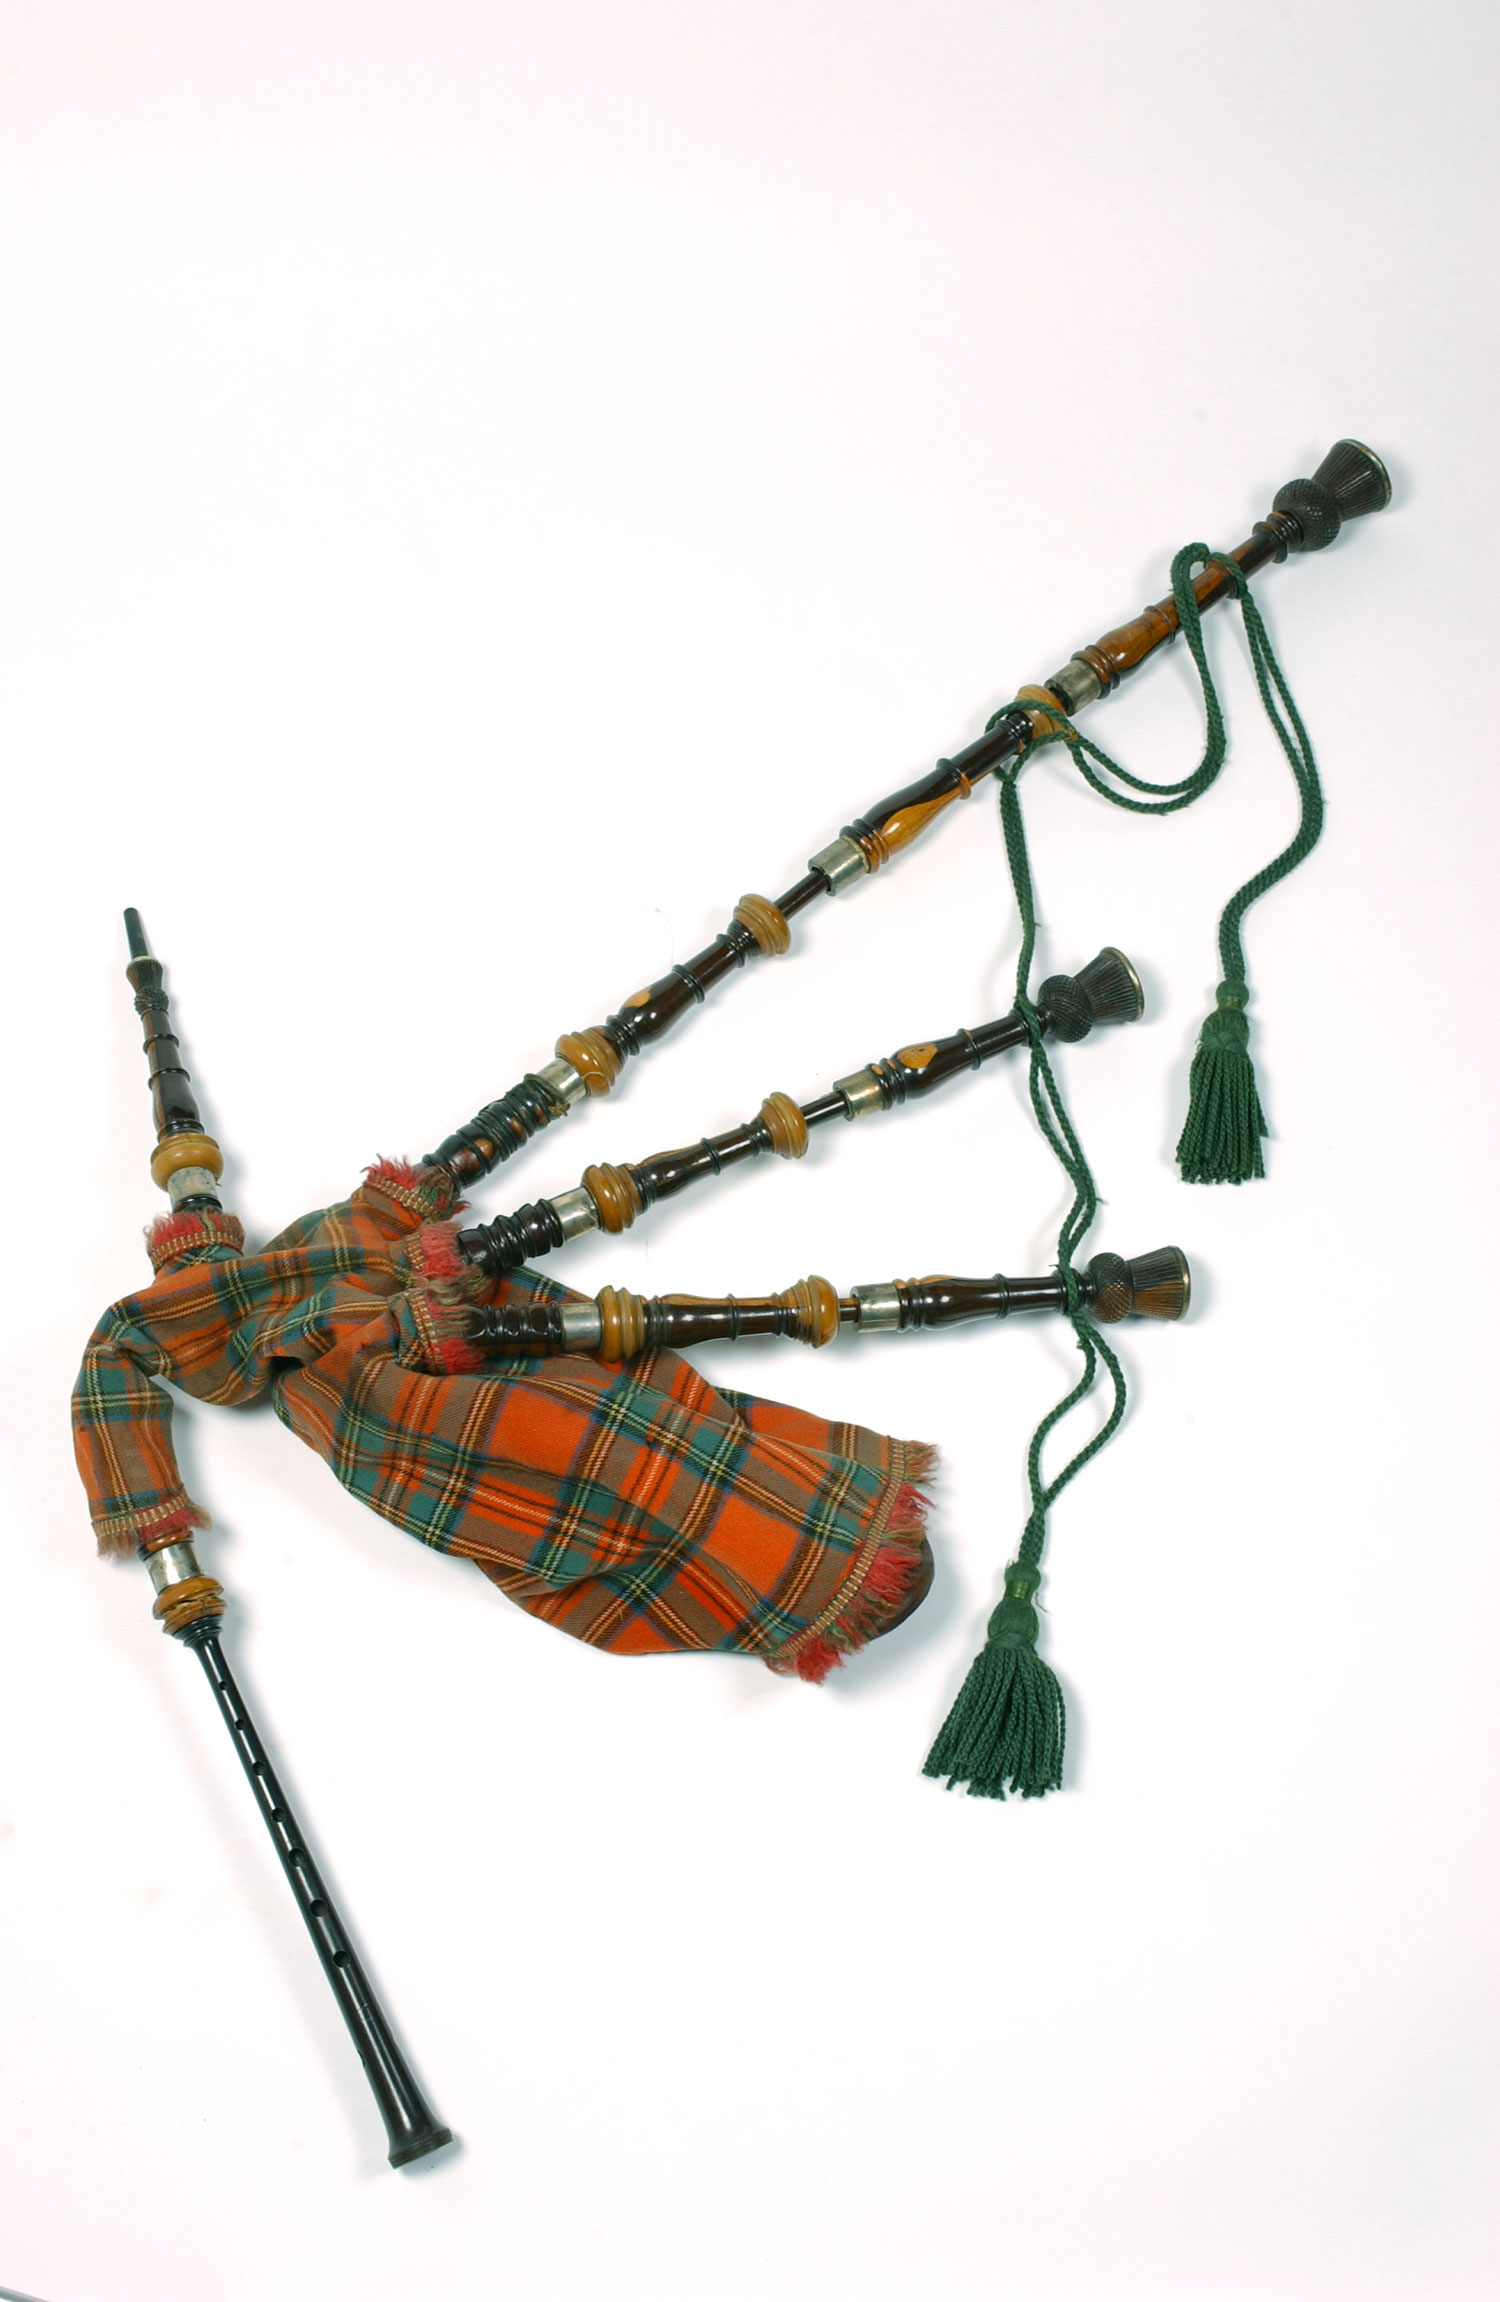 Set of Highland bagpipes of laburnum, silver and ivory mounted, with Royal Stewart tartan cover, Edinburgh c1850.